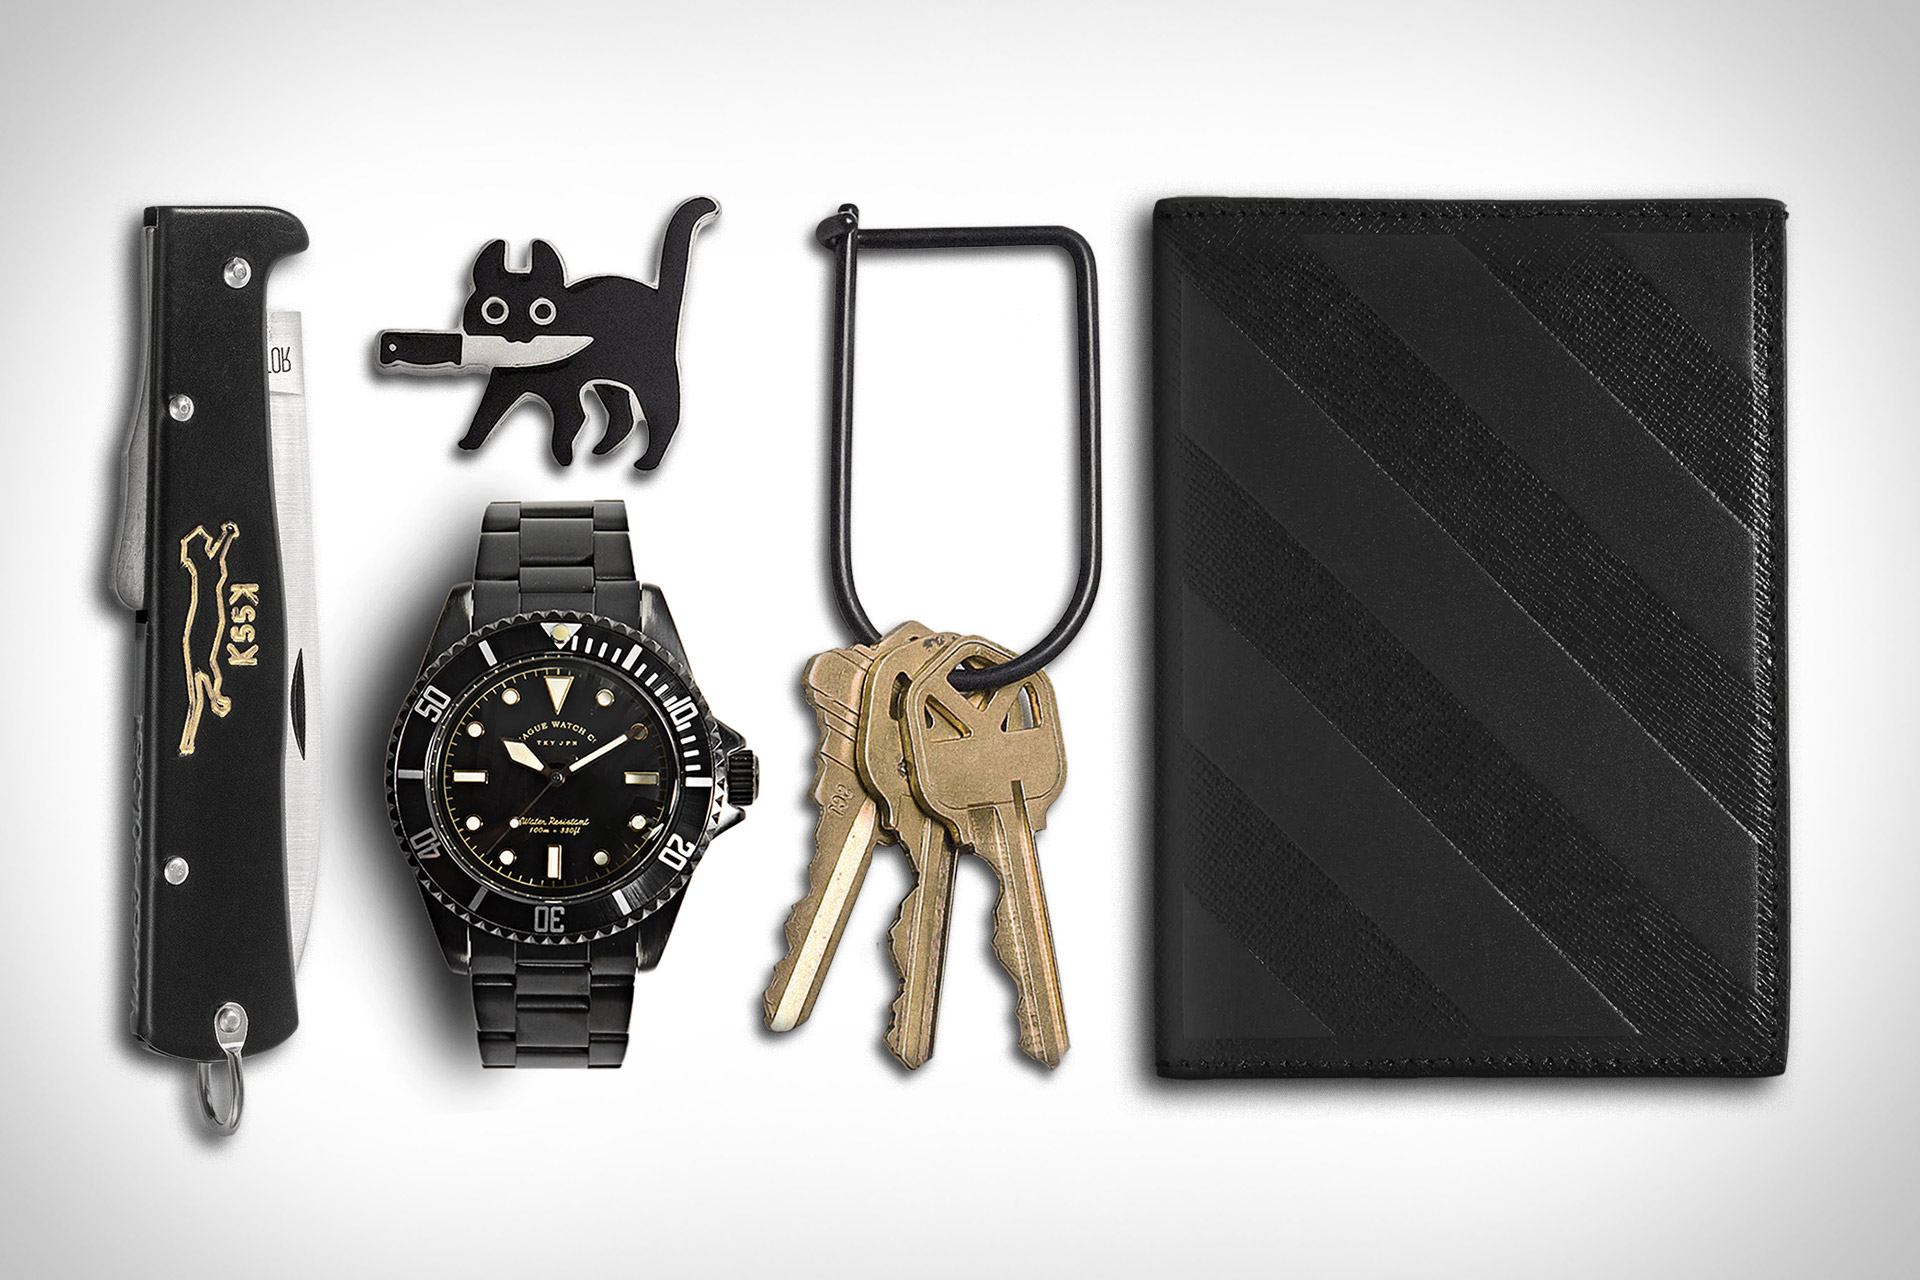 Everyday Carry: Black Cat | Uncrate, #Everyday #Carry #Black #Cat #Uncrate